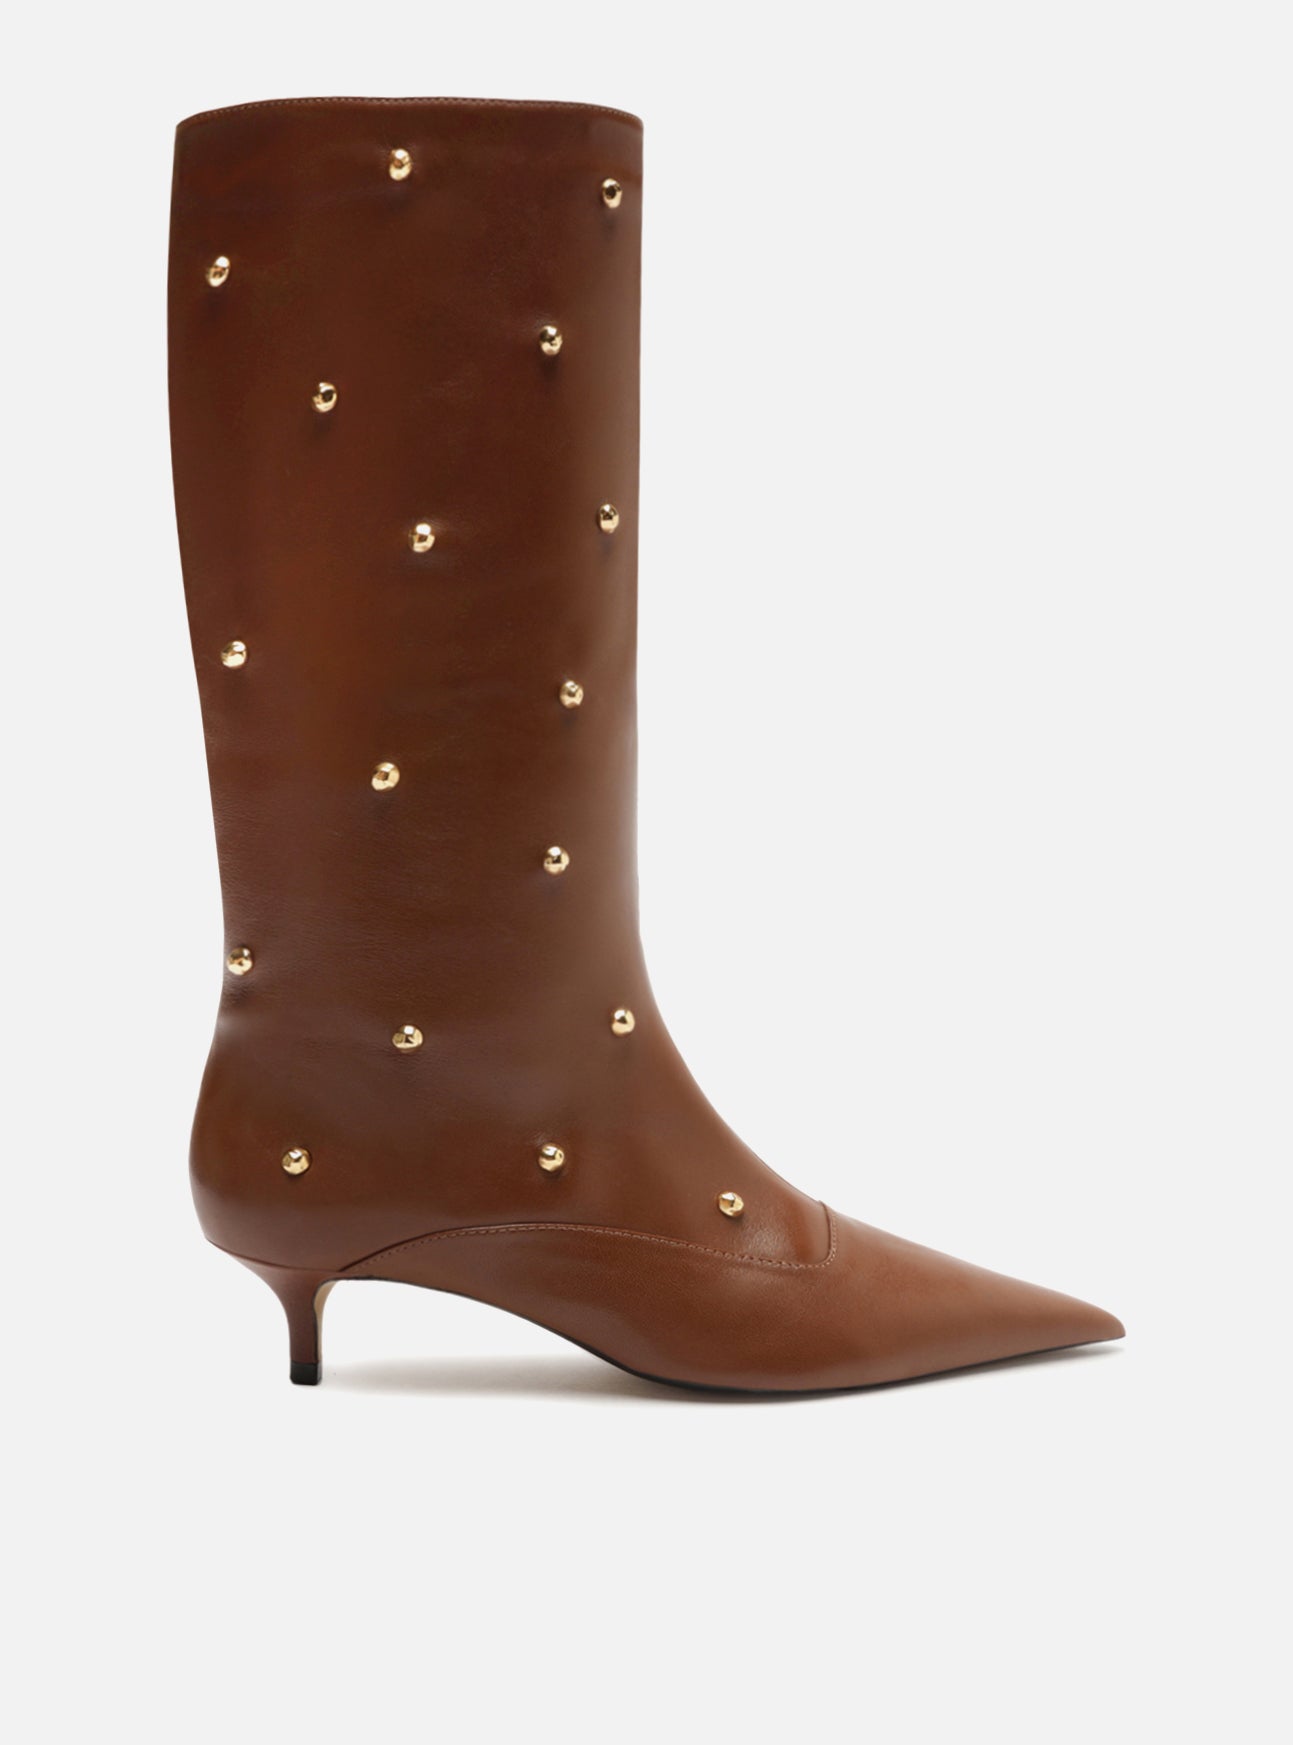 " Brown leather ankle boots with a mid-calf, kitten heel and pointed toe. It has a tight upper and golden metallic studs throughout the shaft."